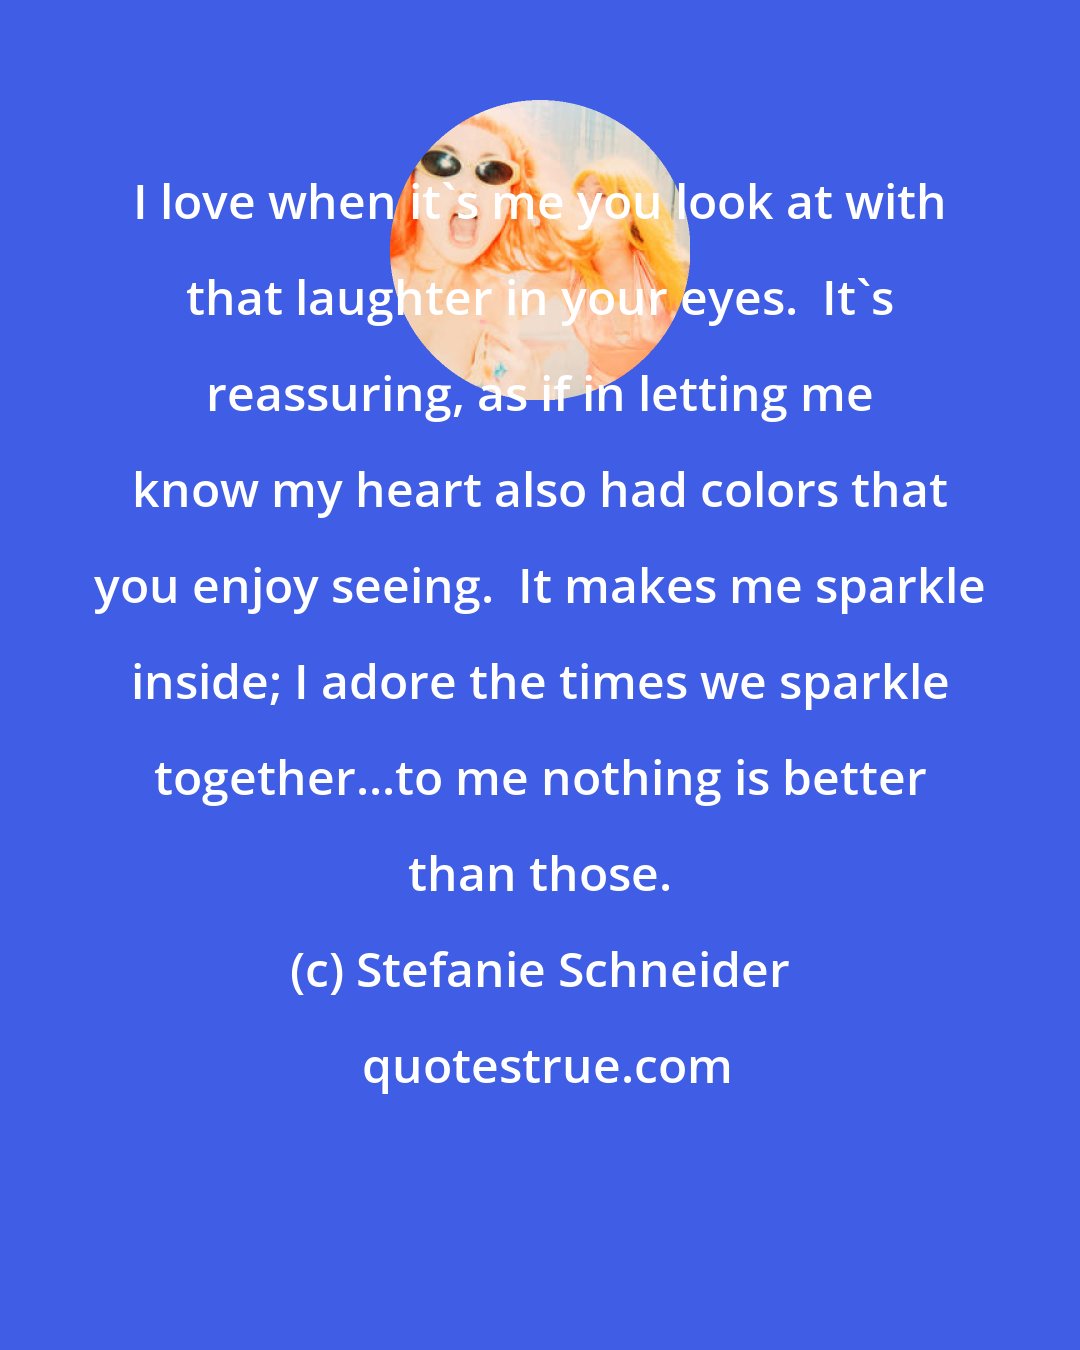 Stefanie Schneider: I love when it's me you look at with that laughter in your eyes.  It's reassuring, as if in letting me know my heart also had colors that you enjoy seeing.  It makes me sparkle inside; I adore the times we sparkle together...to me nothing is better than those.